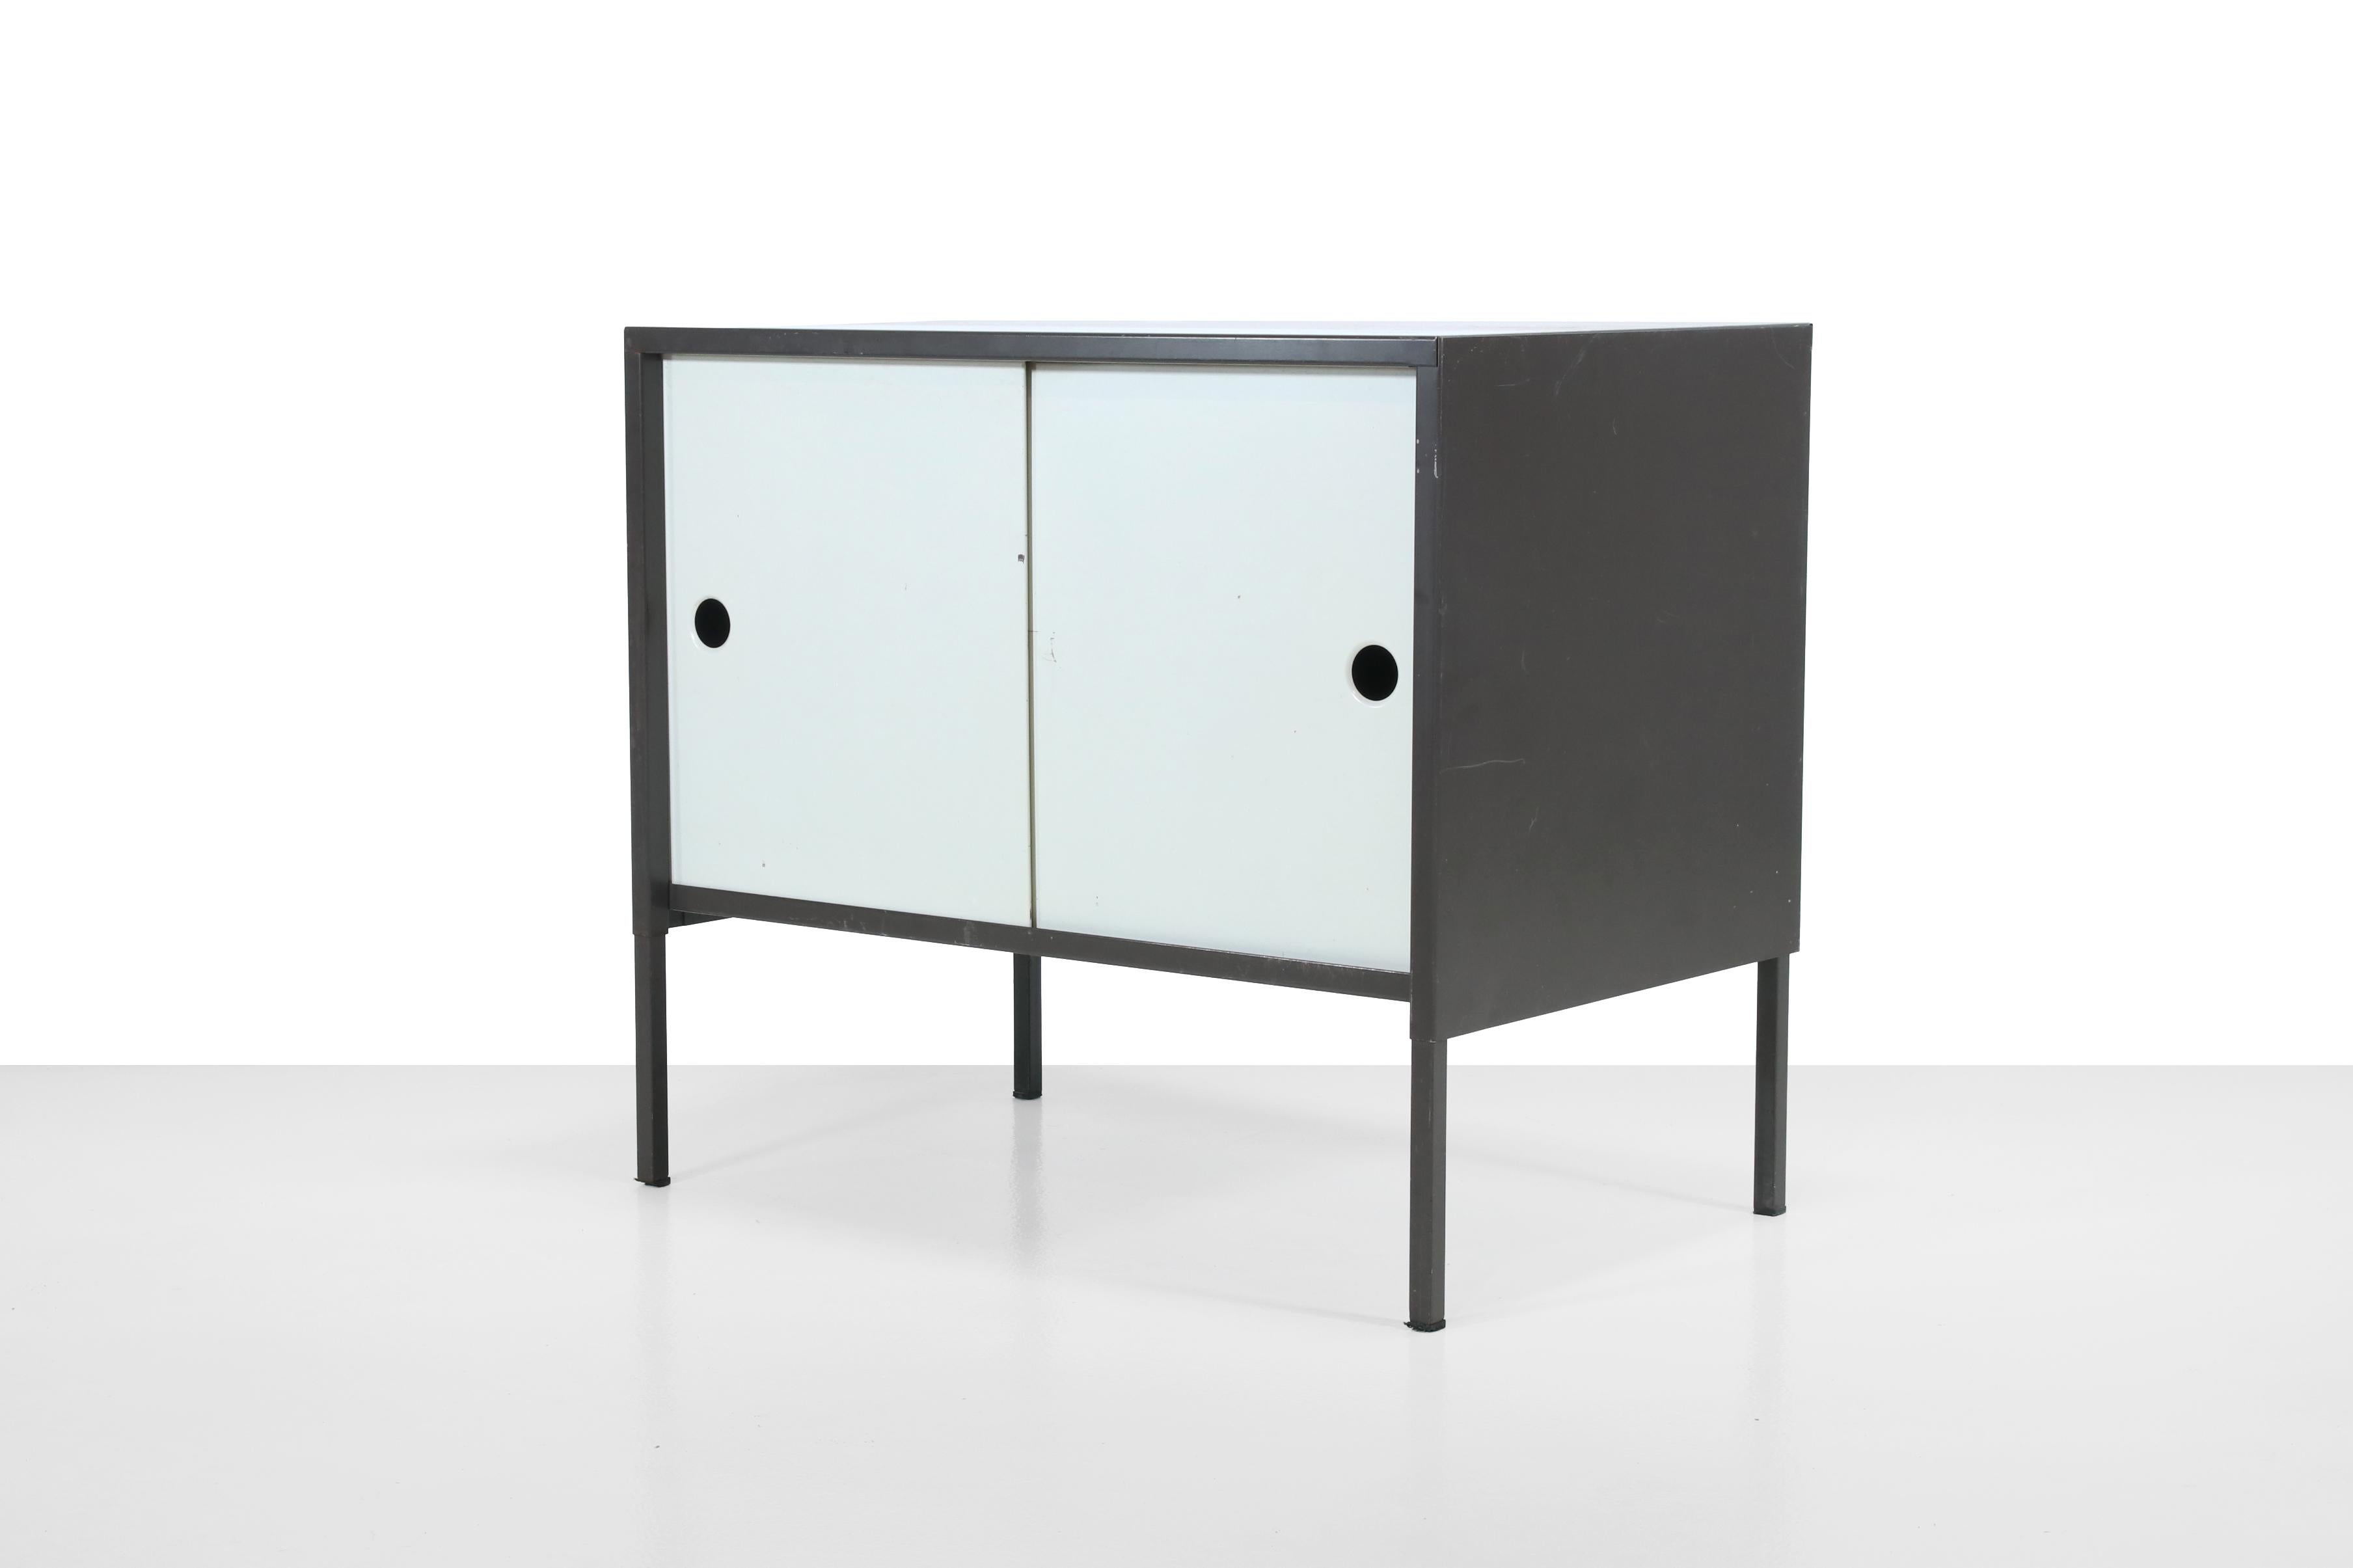 Rare cabinet by Coen de Vries for Pilastro. Made of gray and white lacquered metal. Super nice minimalist Dutch design cabinet for in the hallway, for your record player or wherever you want. Due to its size, the cabinet is super versatile. The